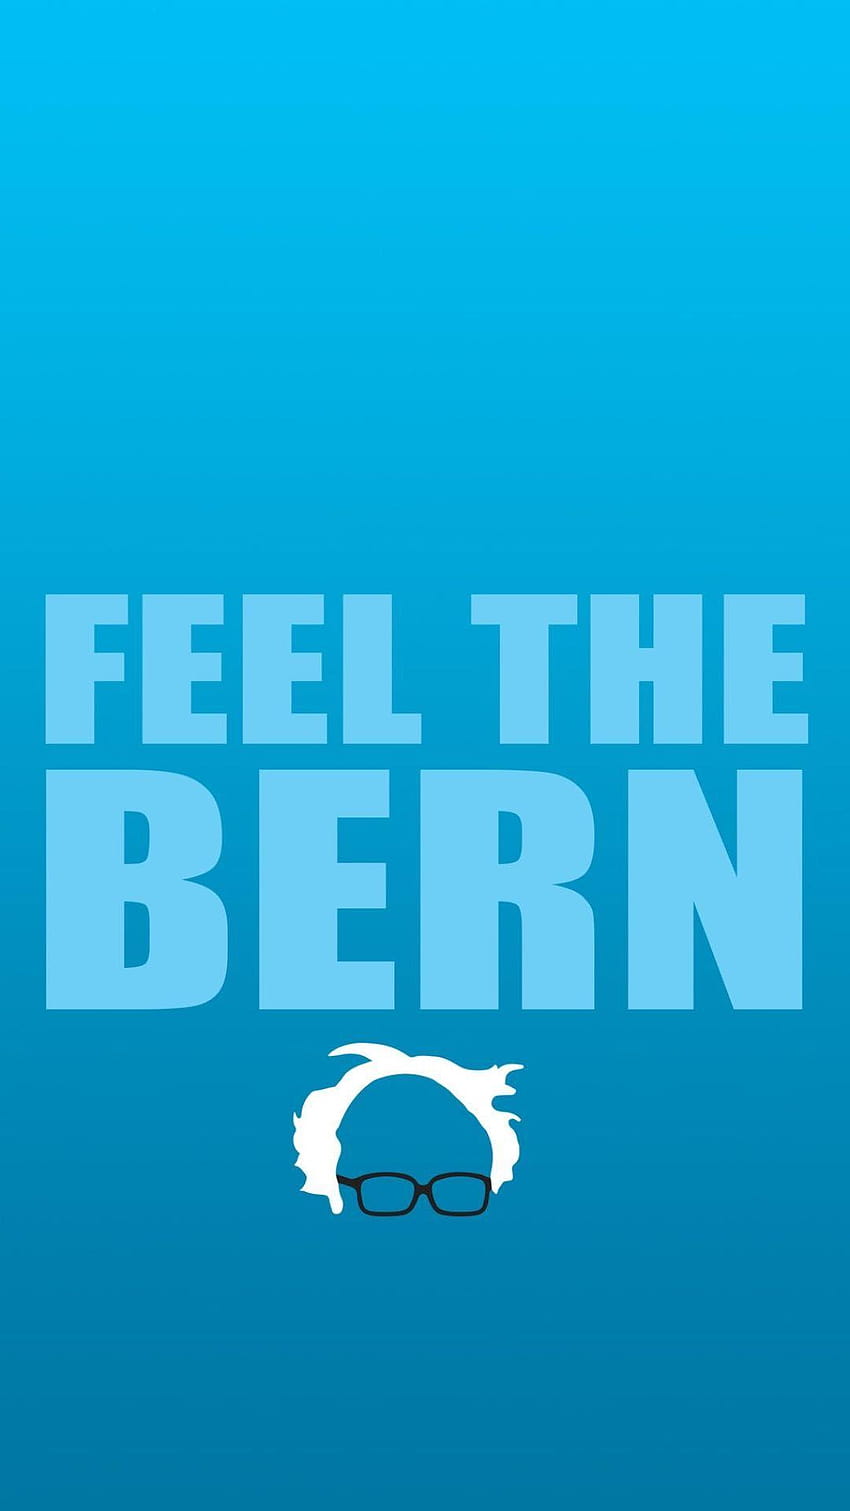 If you support Bernie Sanders this will do nicely! HD phone wallpaper